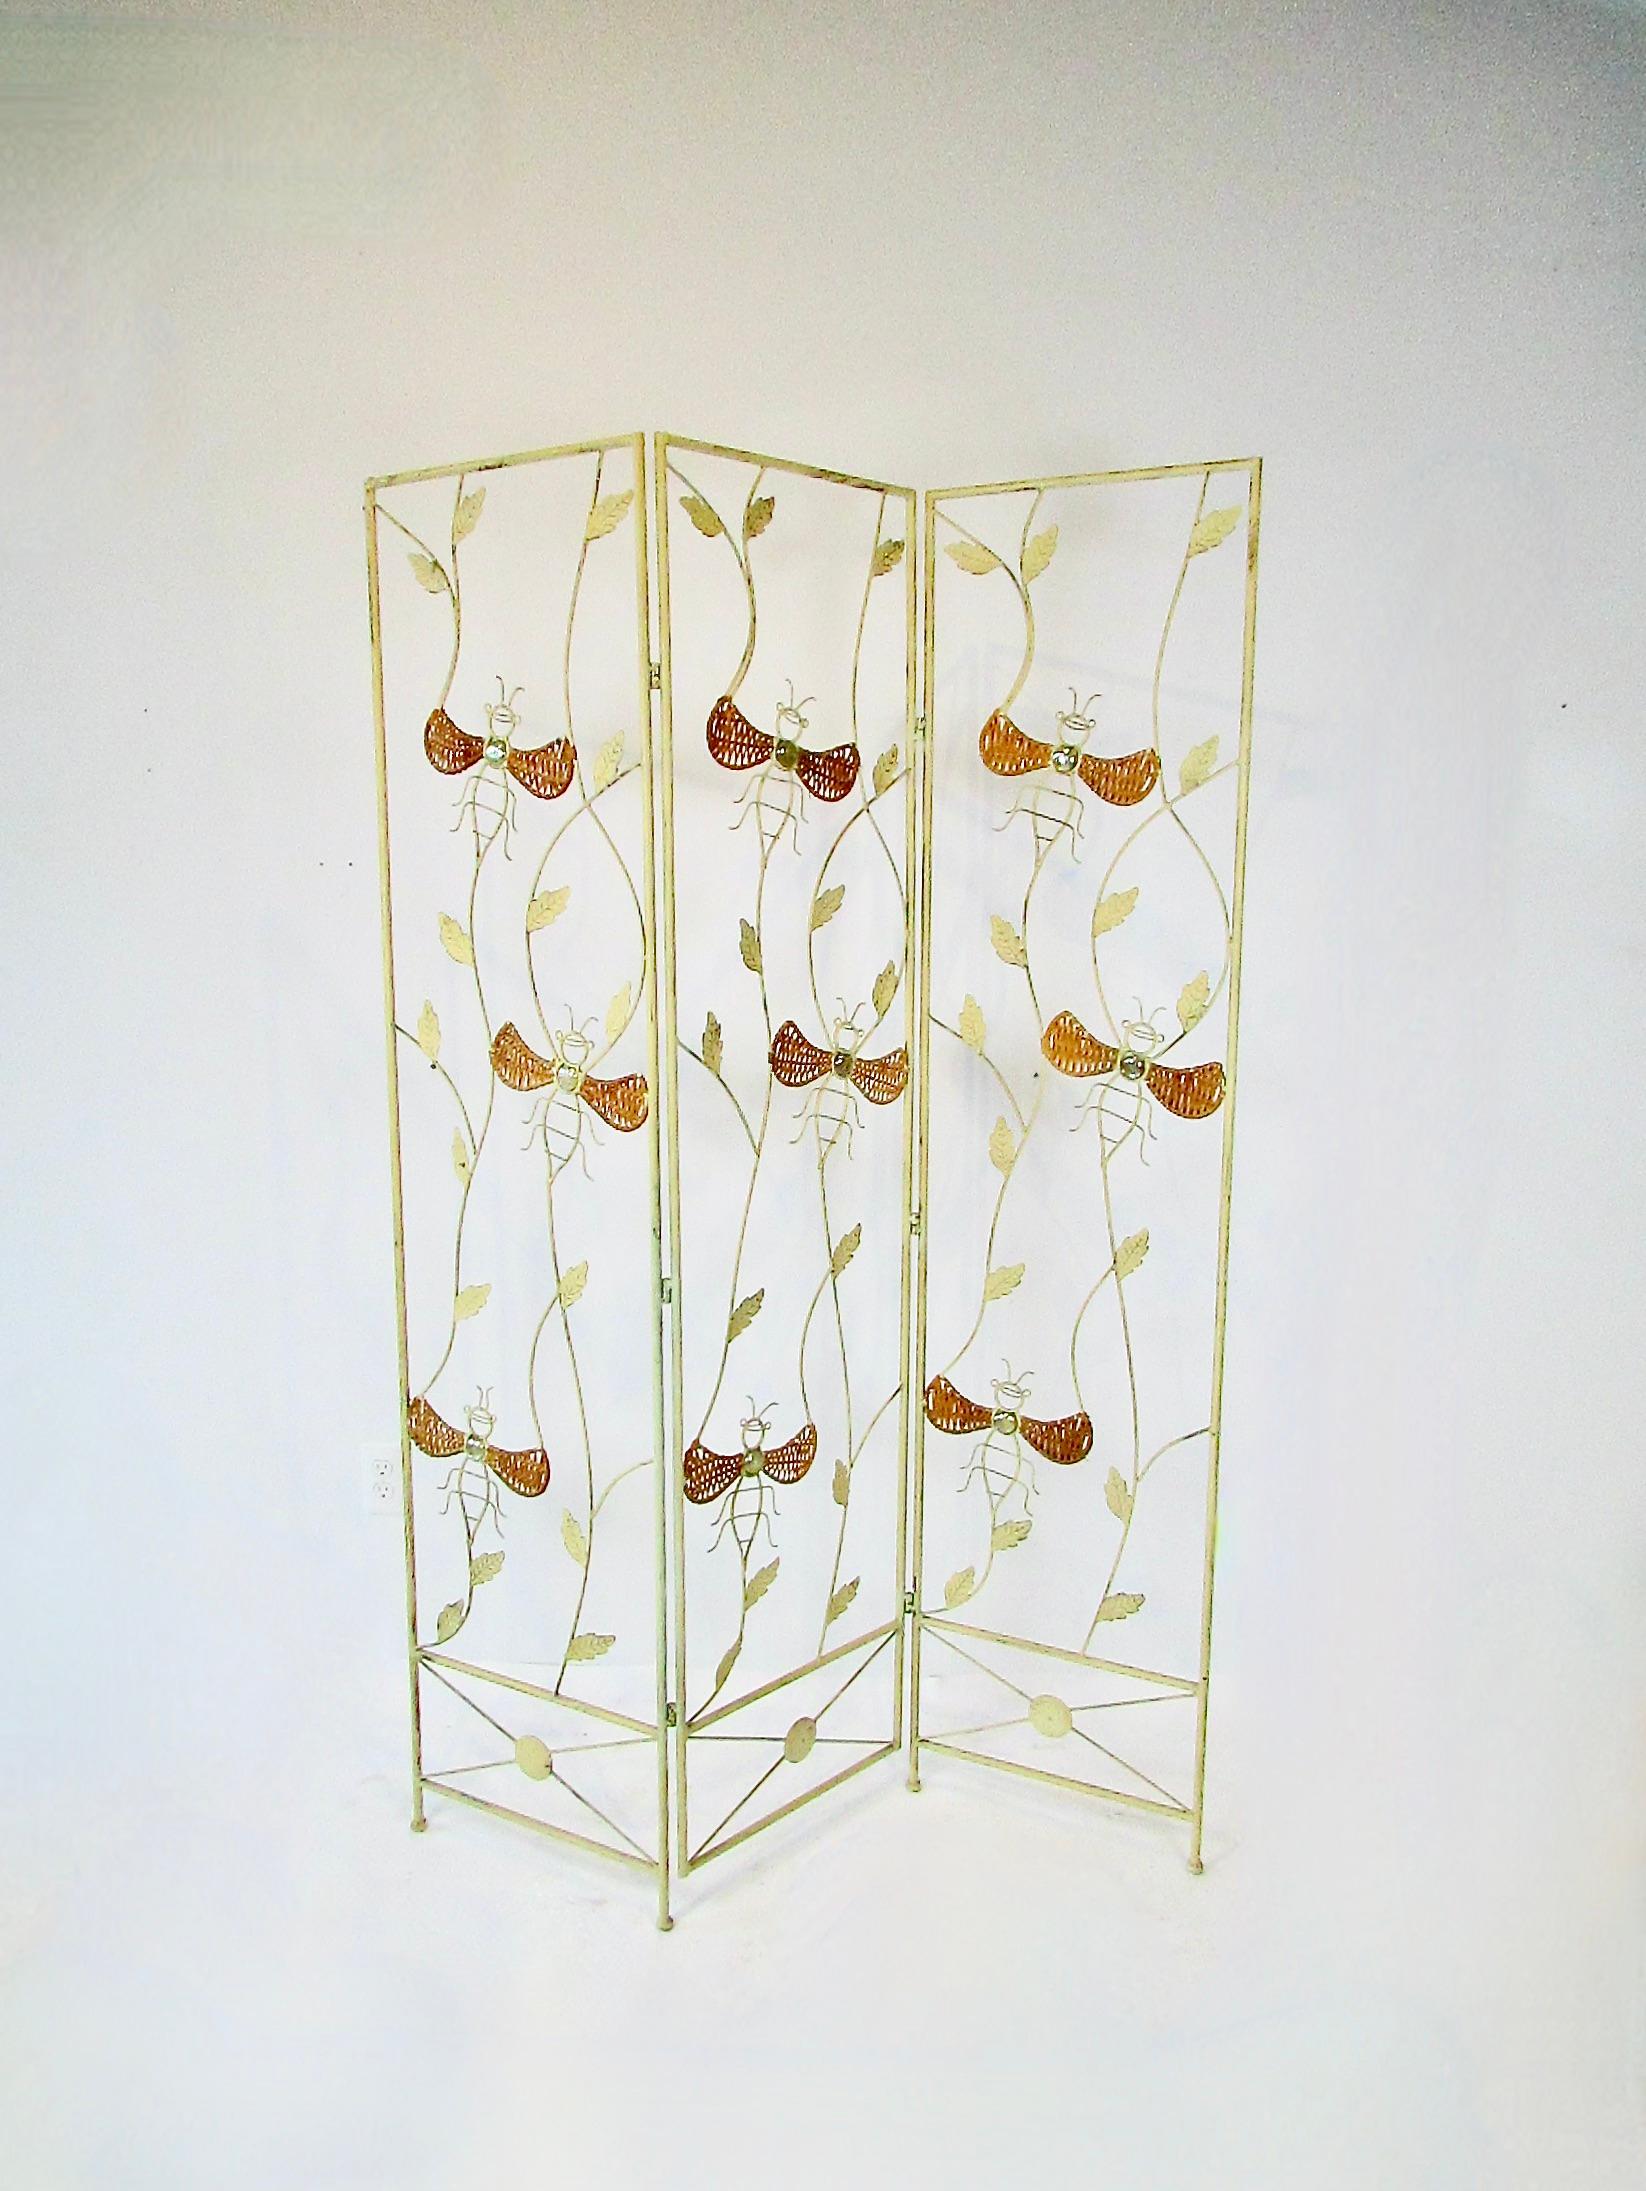 Unique whimsical and organic in design wrought iron  three panel screen . Lacquered steel with bumblebee / insect decoration . Wings of the bee are decorated in cane the body is glass .
Each panel measures 17